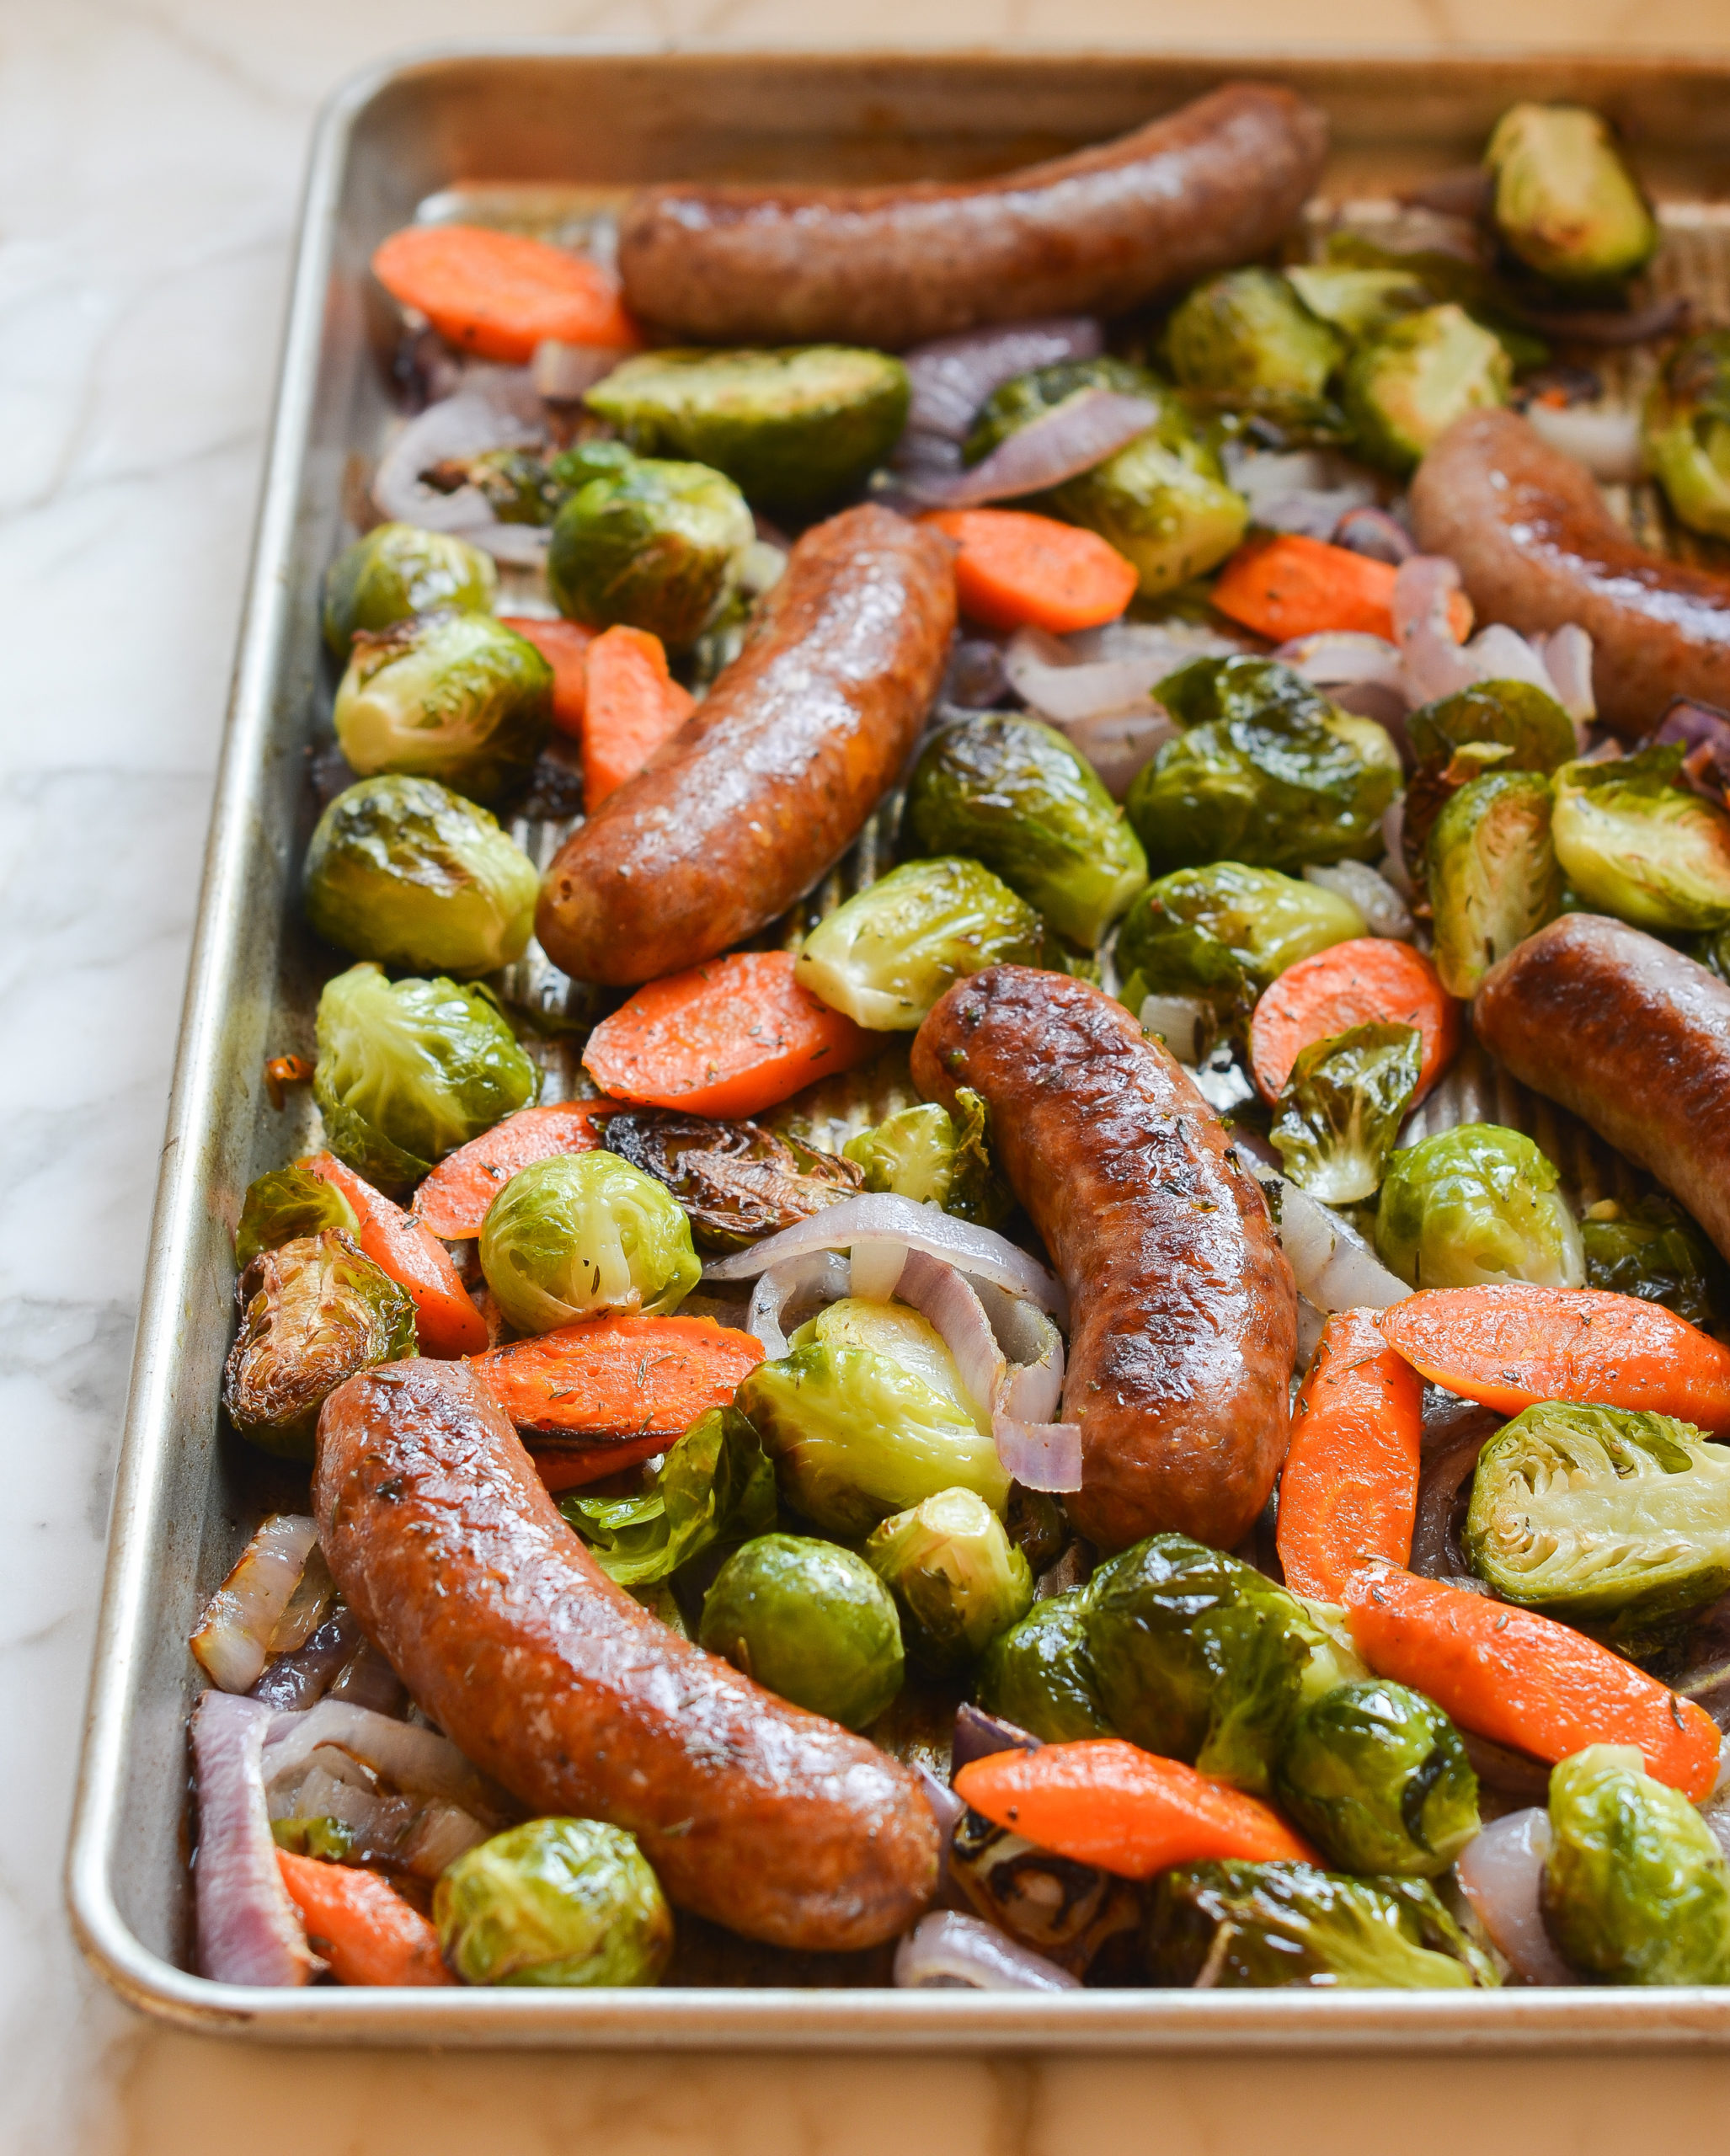 https://www.onceuponachef.com/images/2020/09/Sheet-Pan-Sausage-and-Vegetables-scaled.jpg